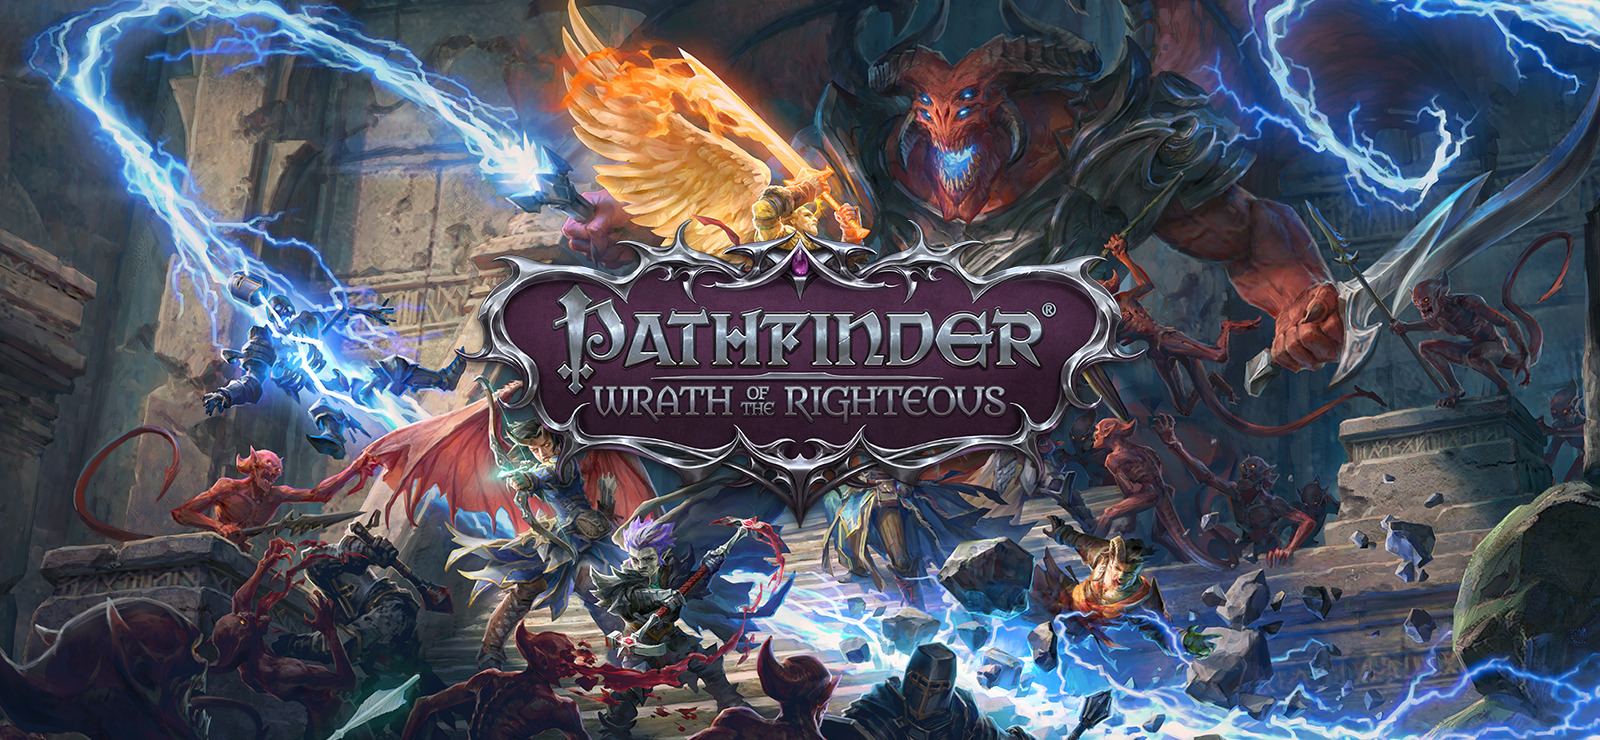 download pathfinder wrath of the righteous companions